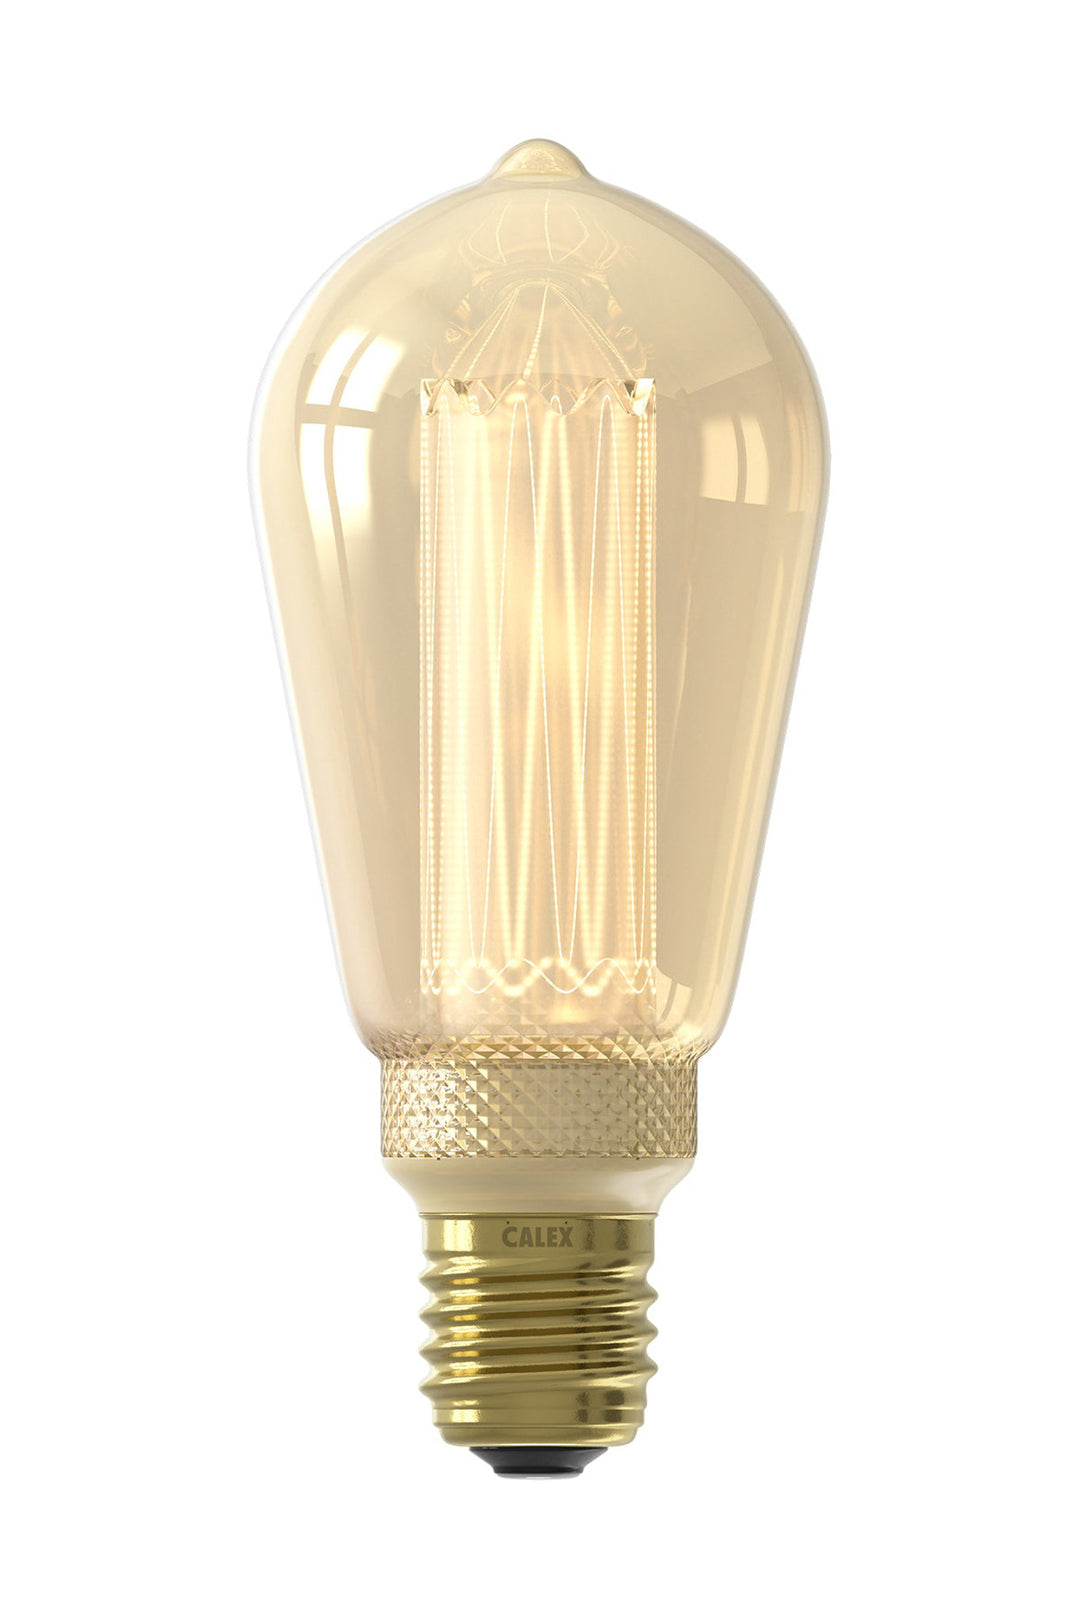 Calex LED Glass Fibre Rustic ST64 Gold, E27, Dimmable with LED Dimmer 1201000600